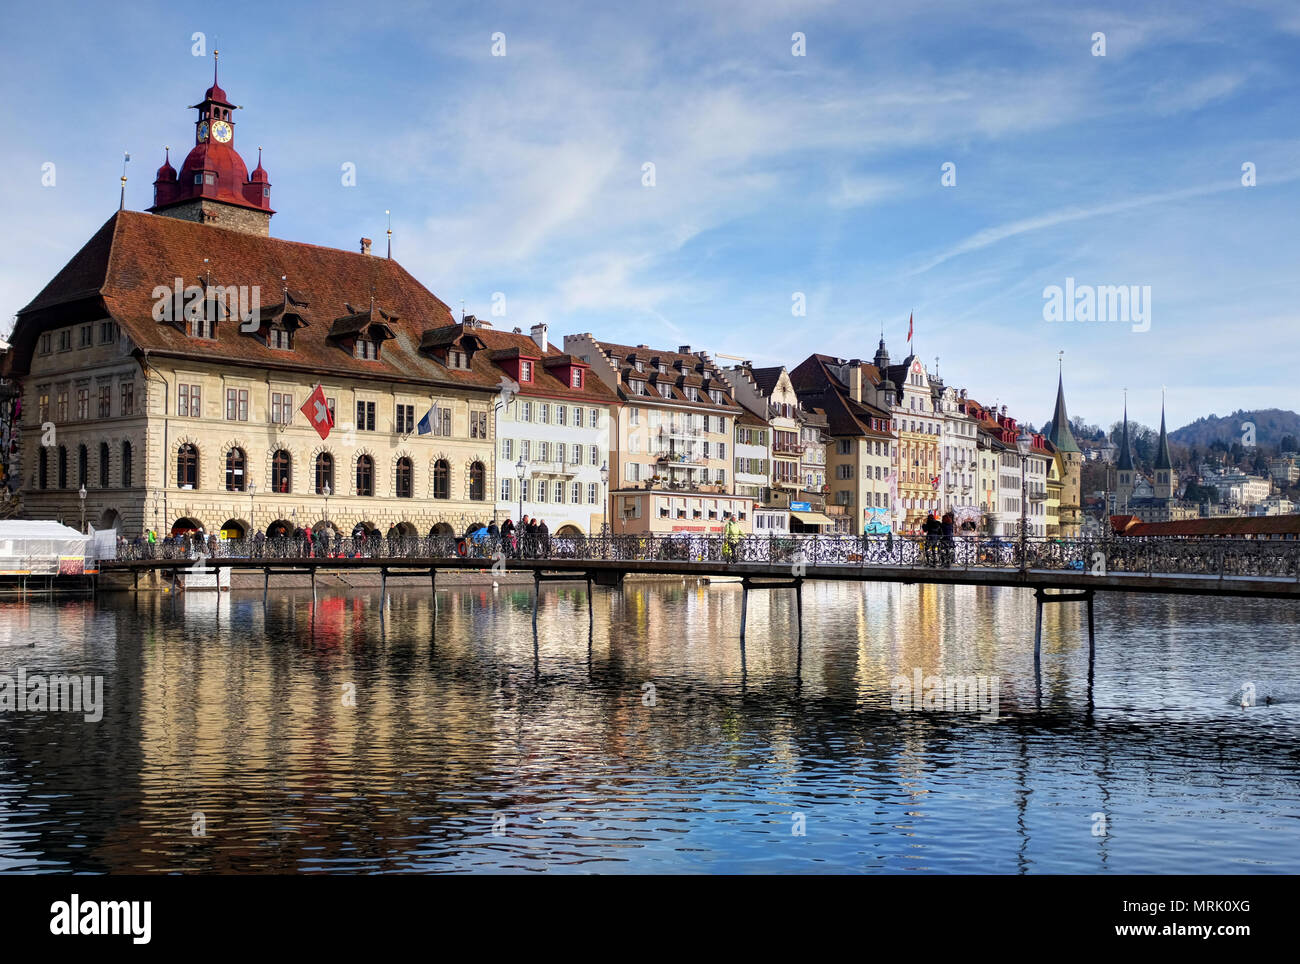 Town Hall on River Reuss, Lucerne, Switzerland, Europe Stock Photo